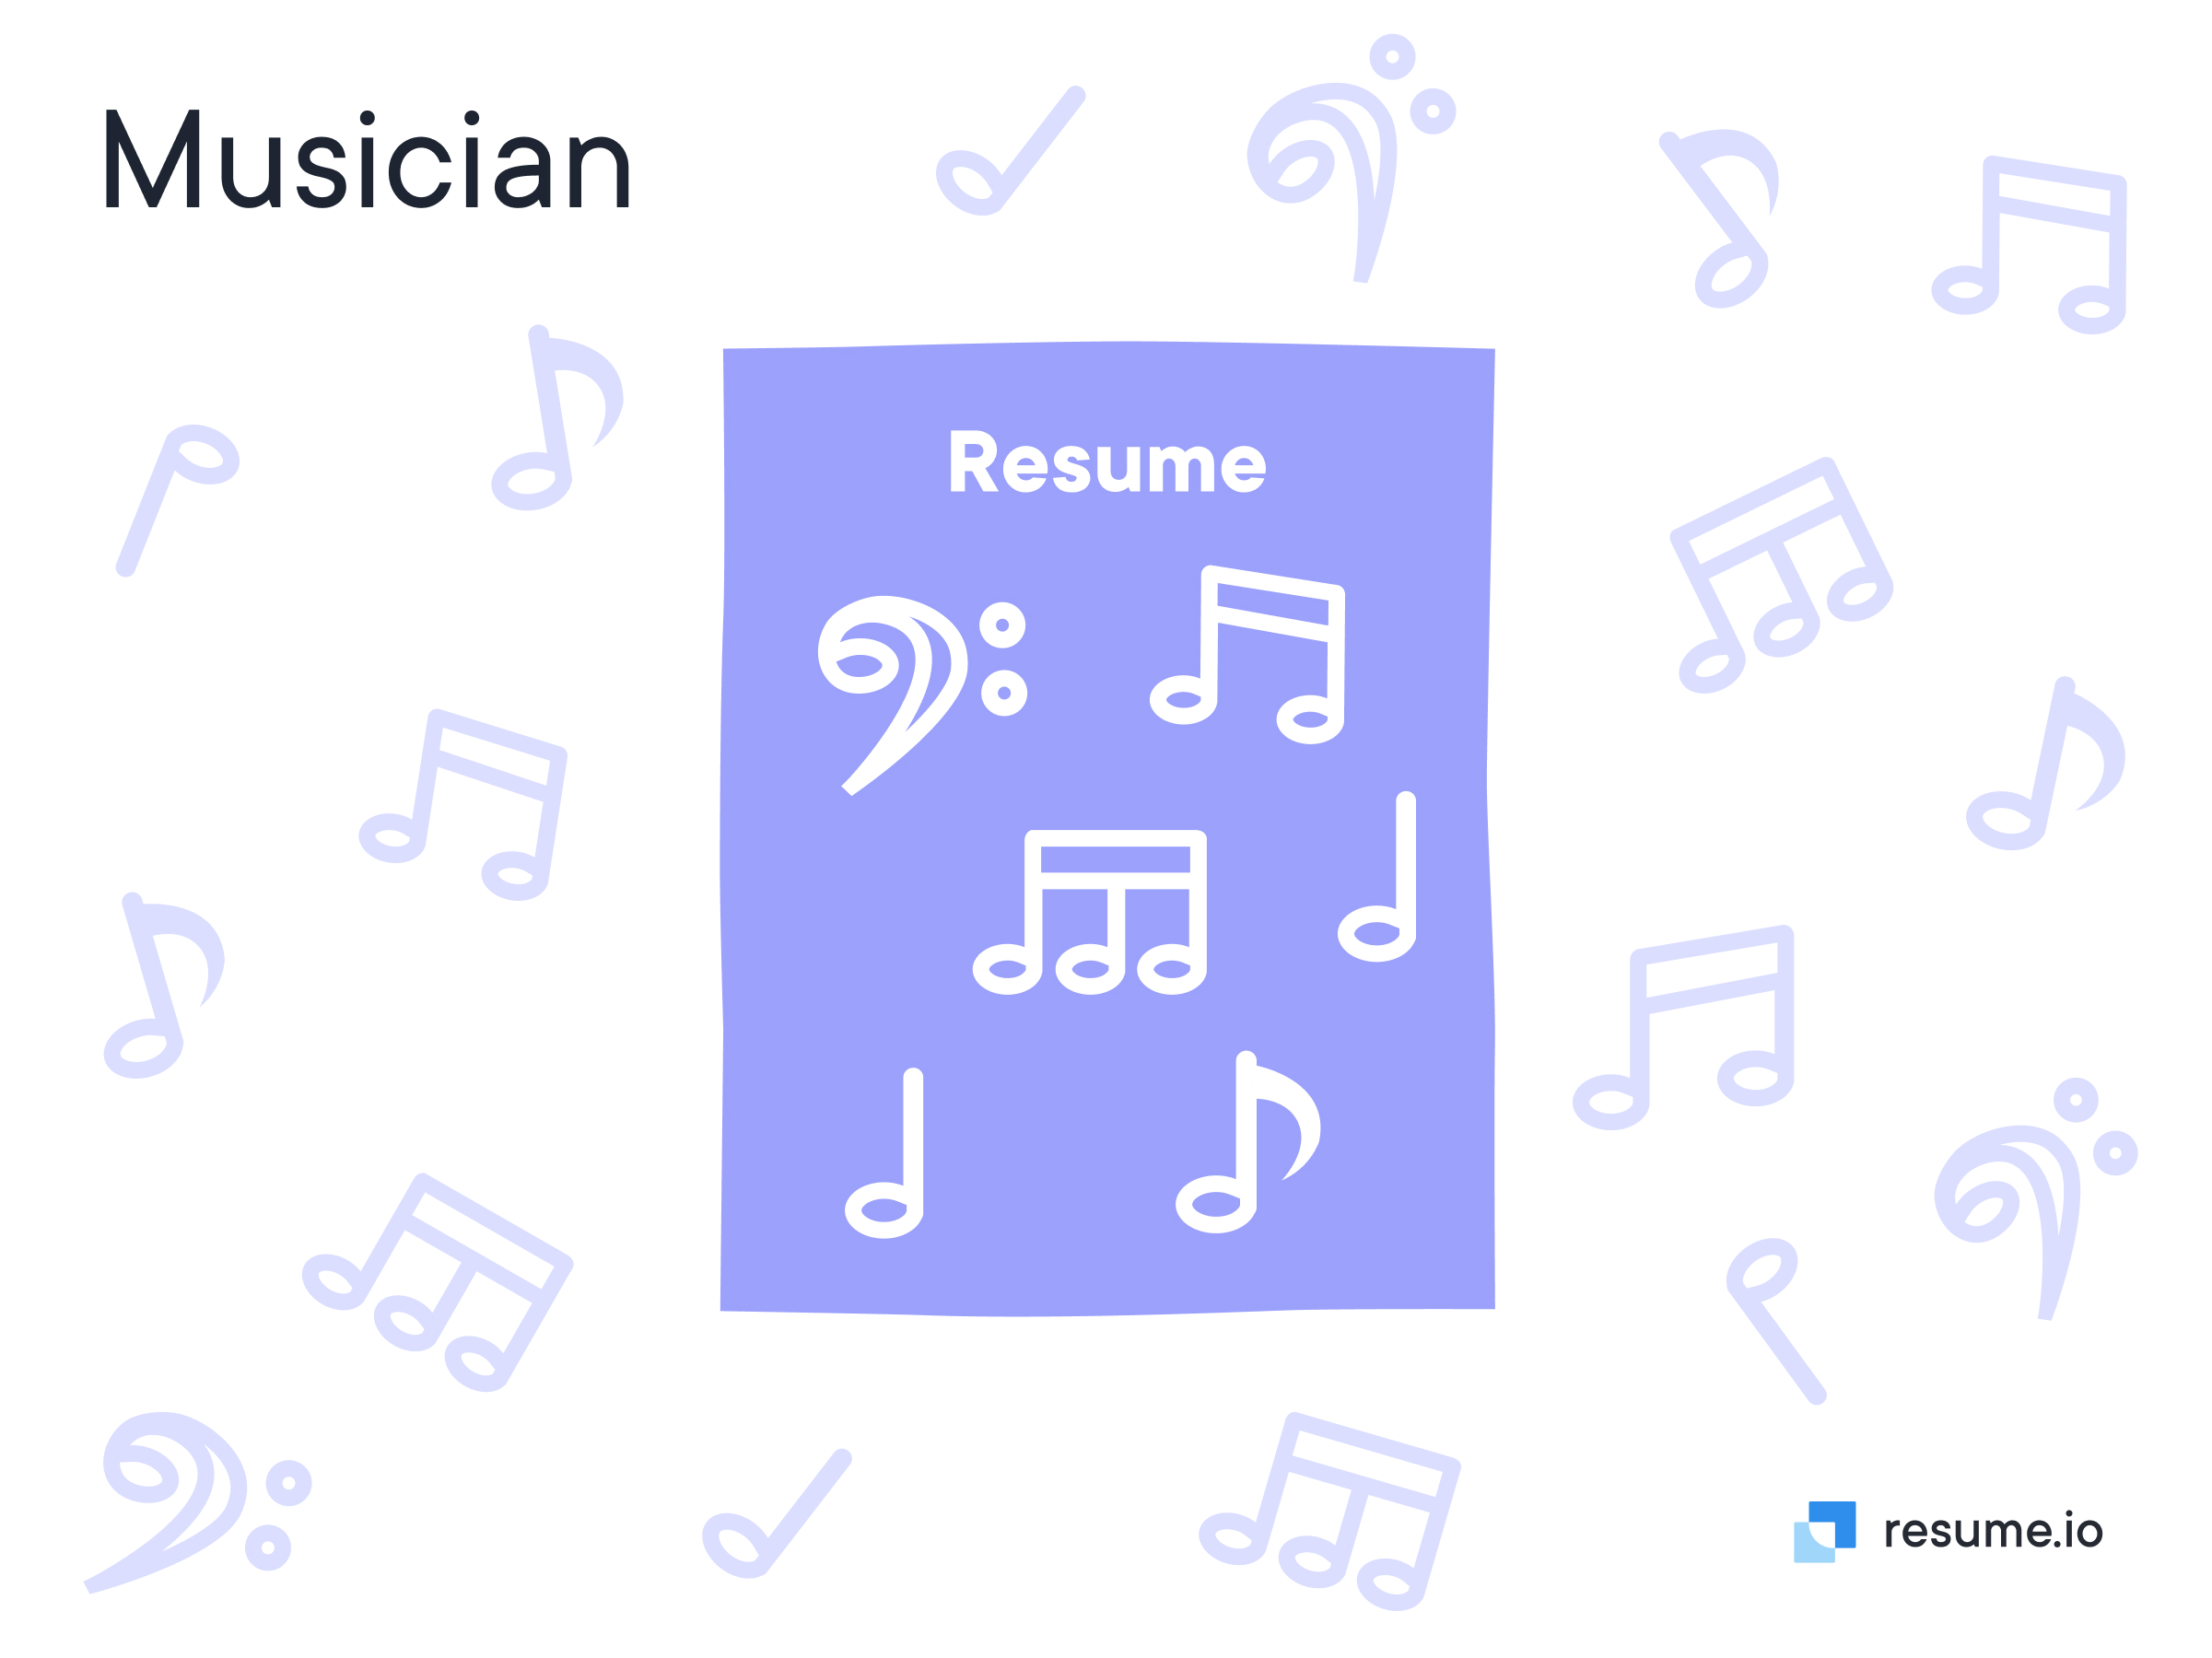 Musical notes on a resume